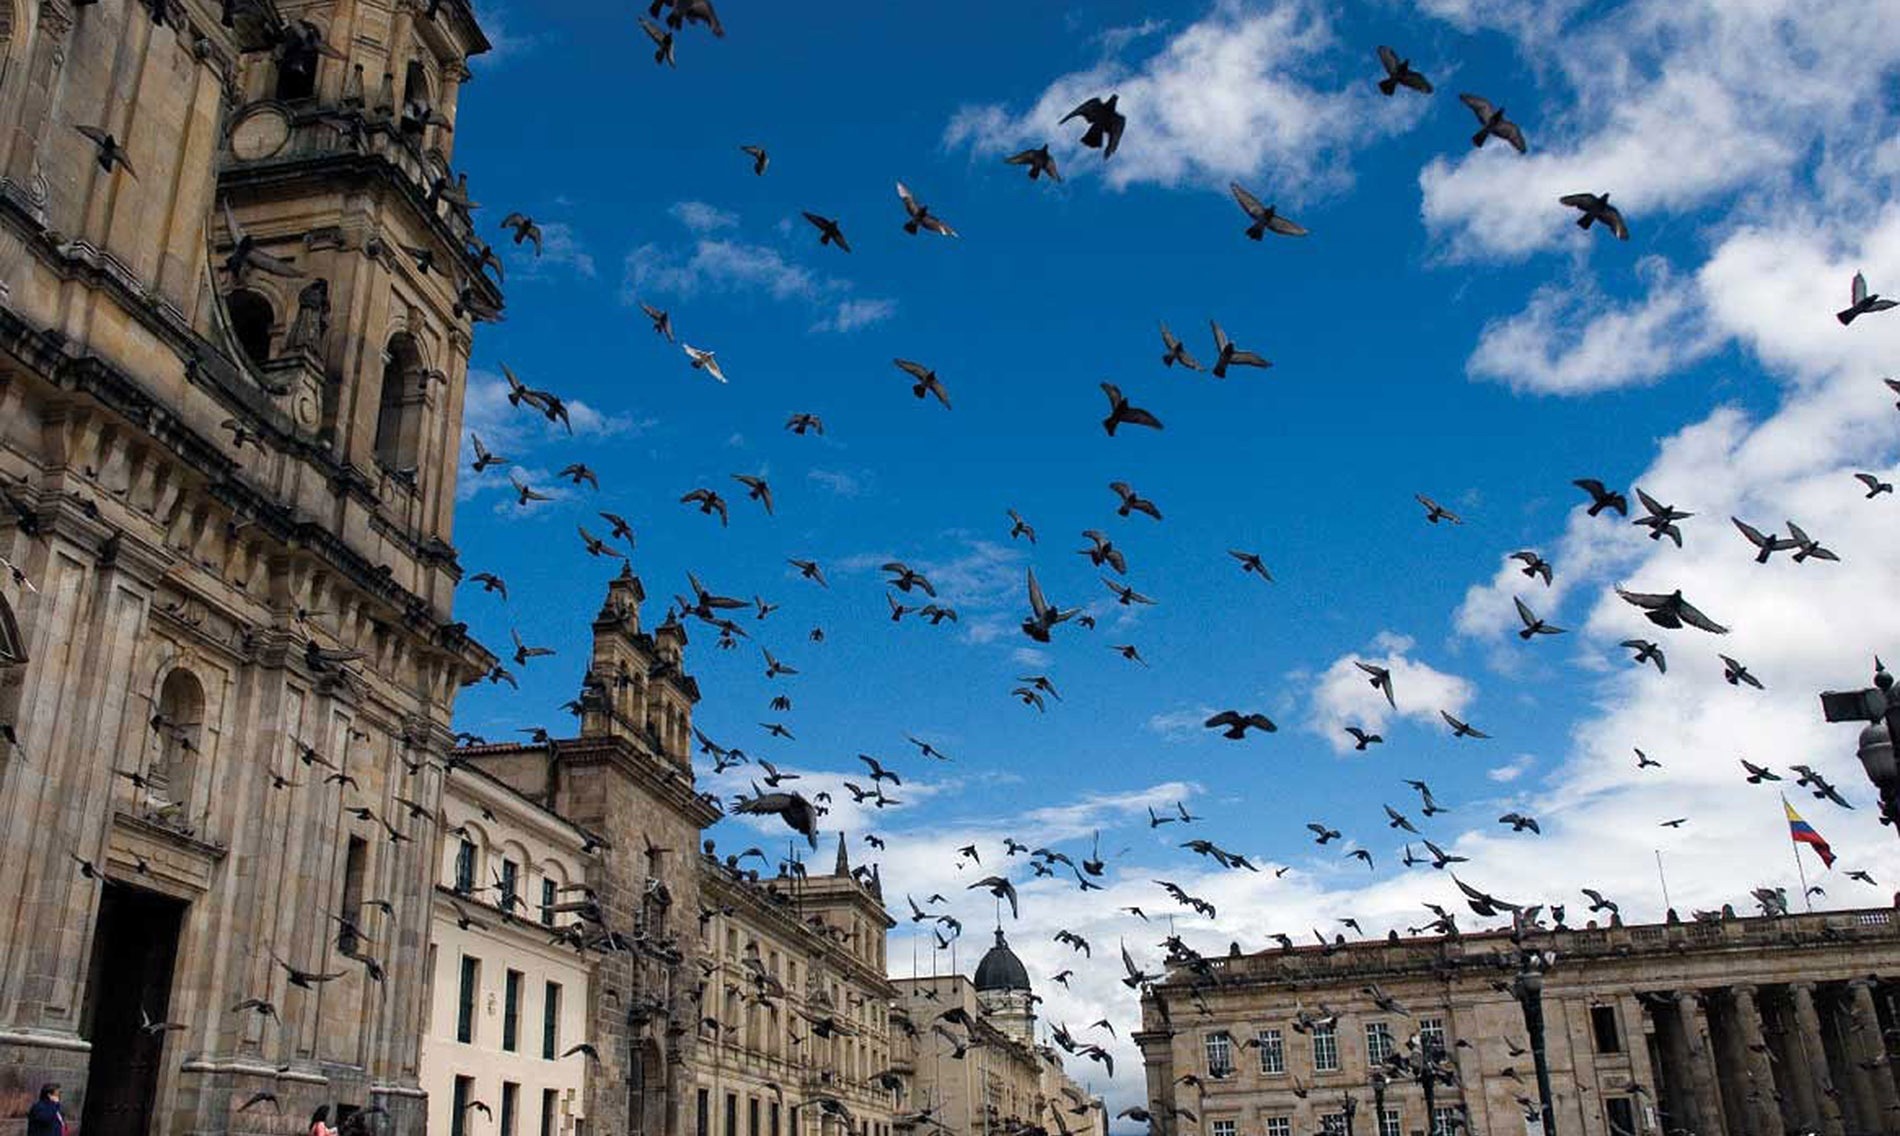 View of the sky and a square with birds